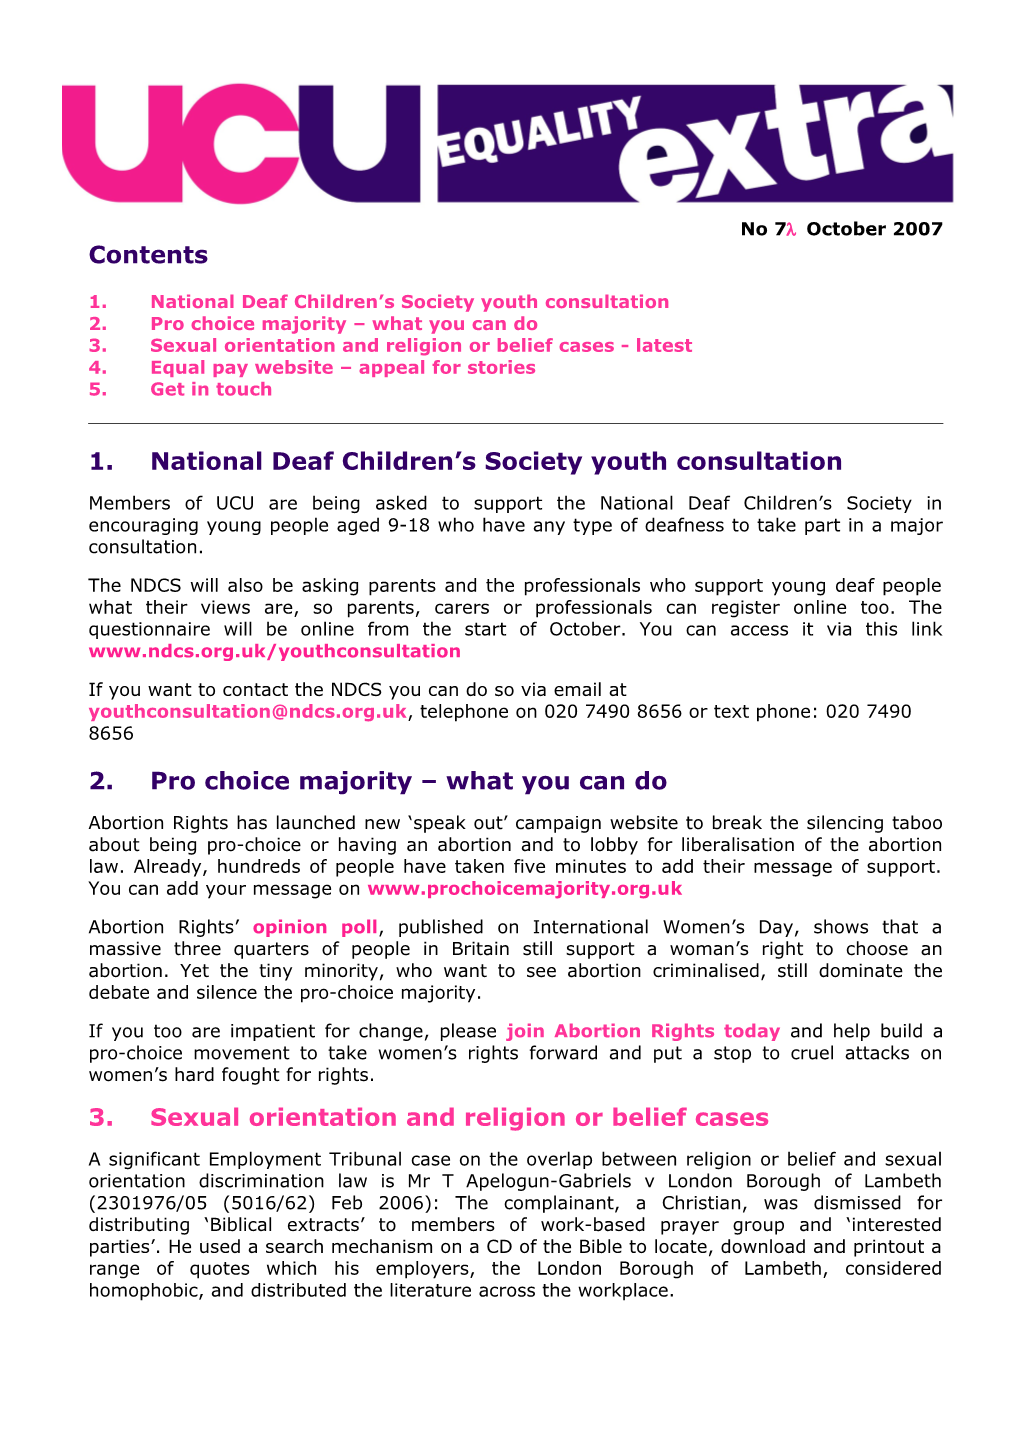 1. National Deaf Children S Society Youth Consultation